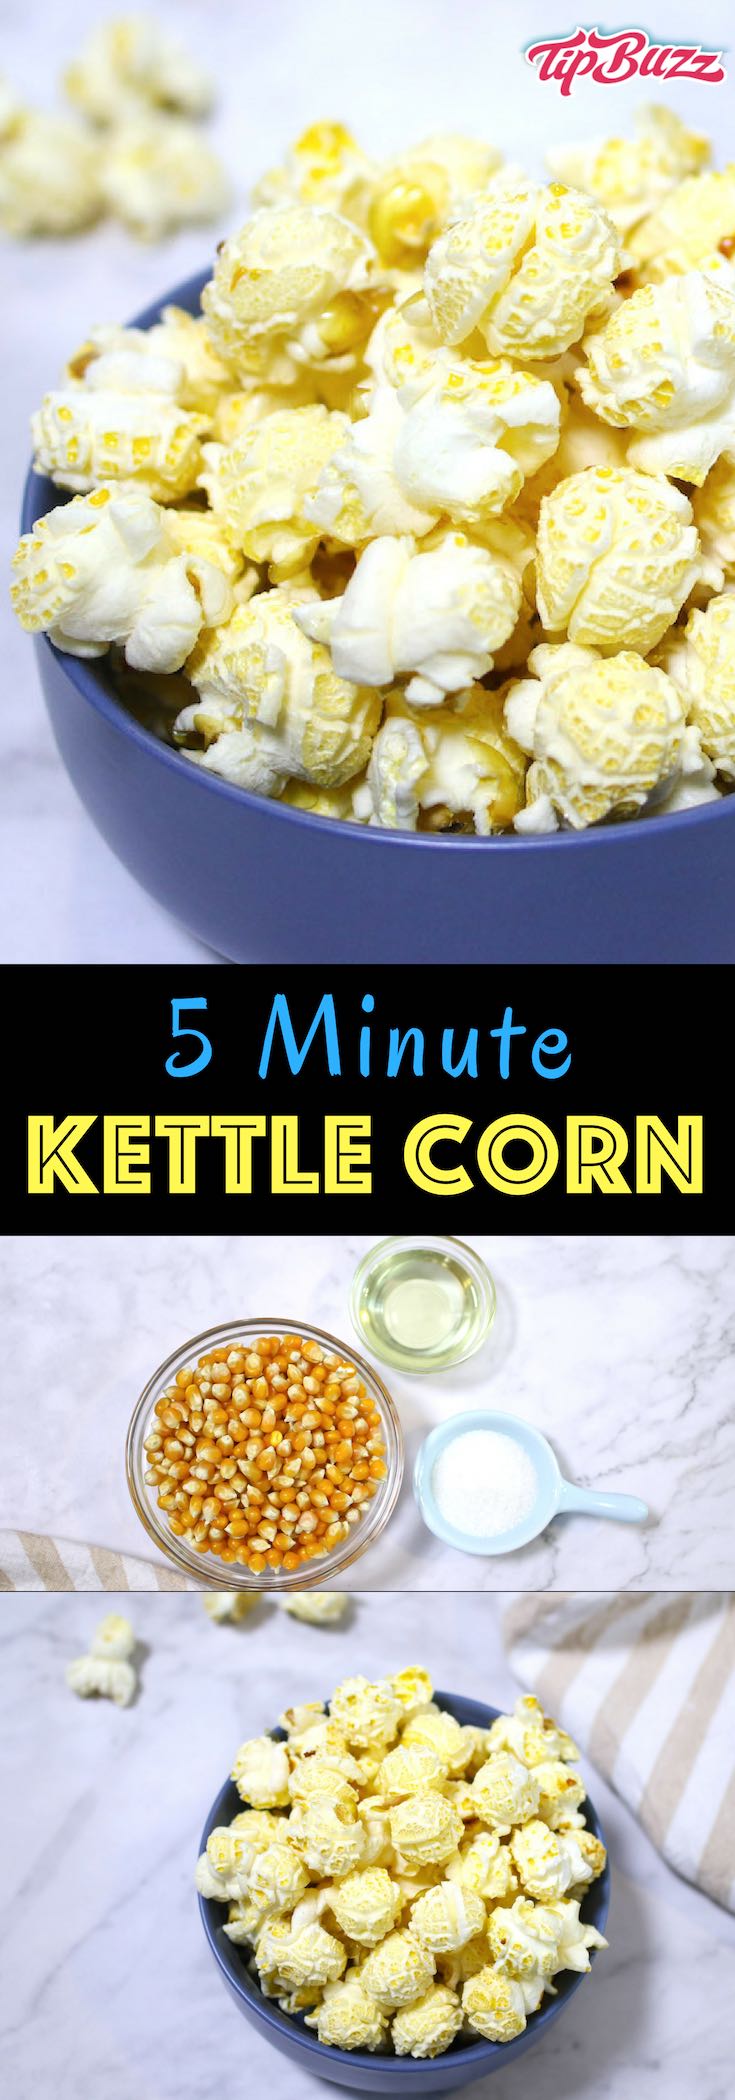 Kettle corn is an irresistible sweet-and-salty snack that's light and airy! It’s the perfect finger food for snacking as well as movie night, game day and any other party. 